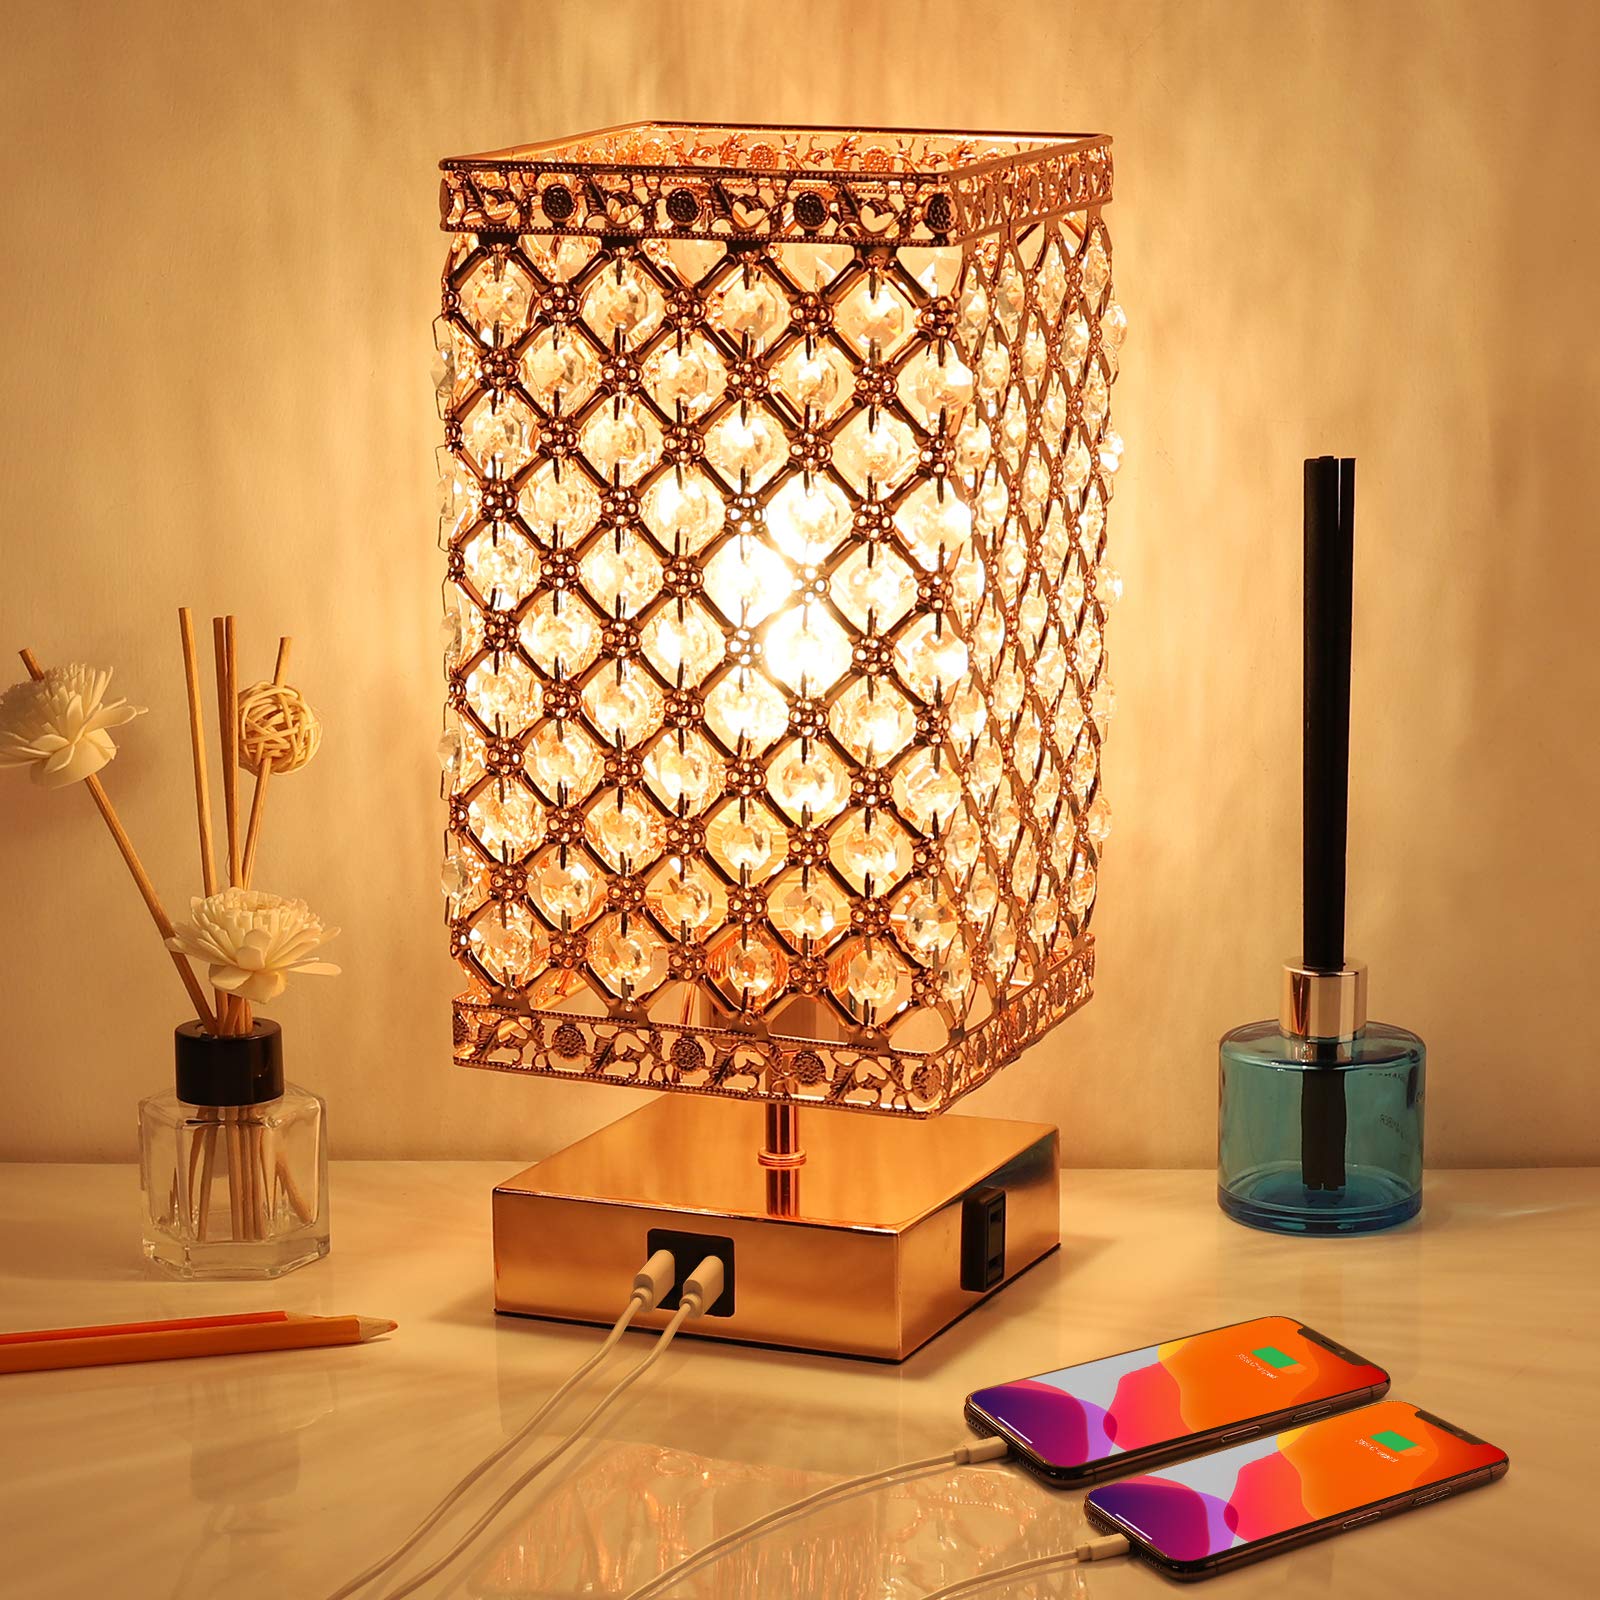 Crystal Table Lamp Crystal Bedroom Lamps with USB Port AC Outlet Touch Crystal Lamp 3 Way Dimmable Bedside Lamp Crystal Nightstand Lamp Rose Gold C...